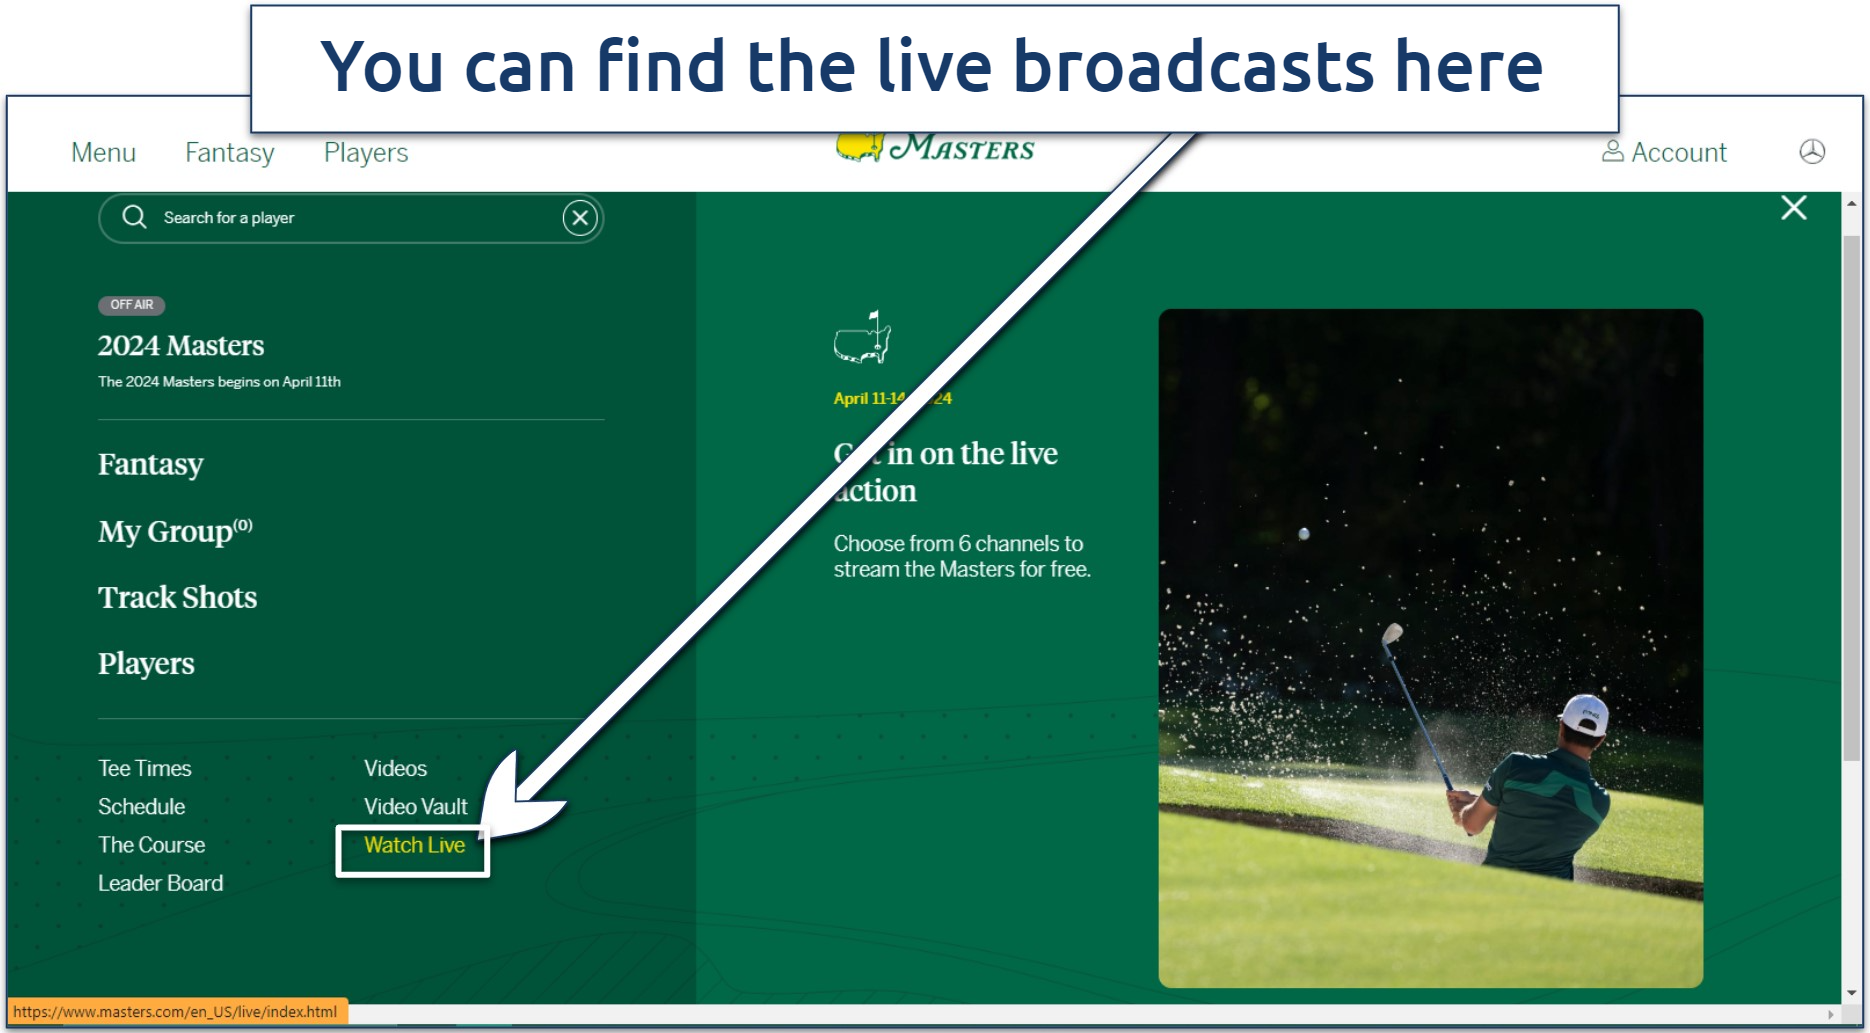 Watching the Masters tournament live via the official Masters website